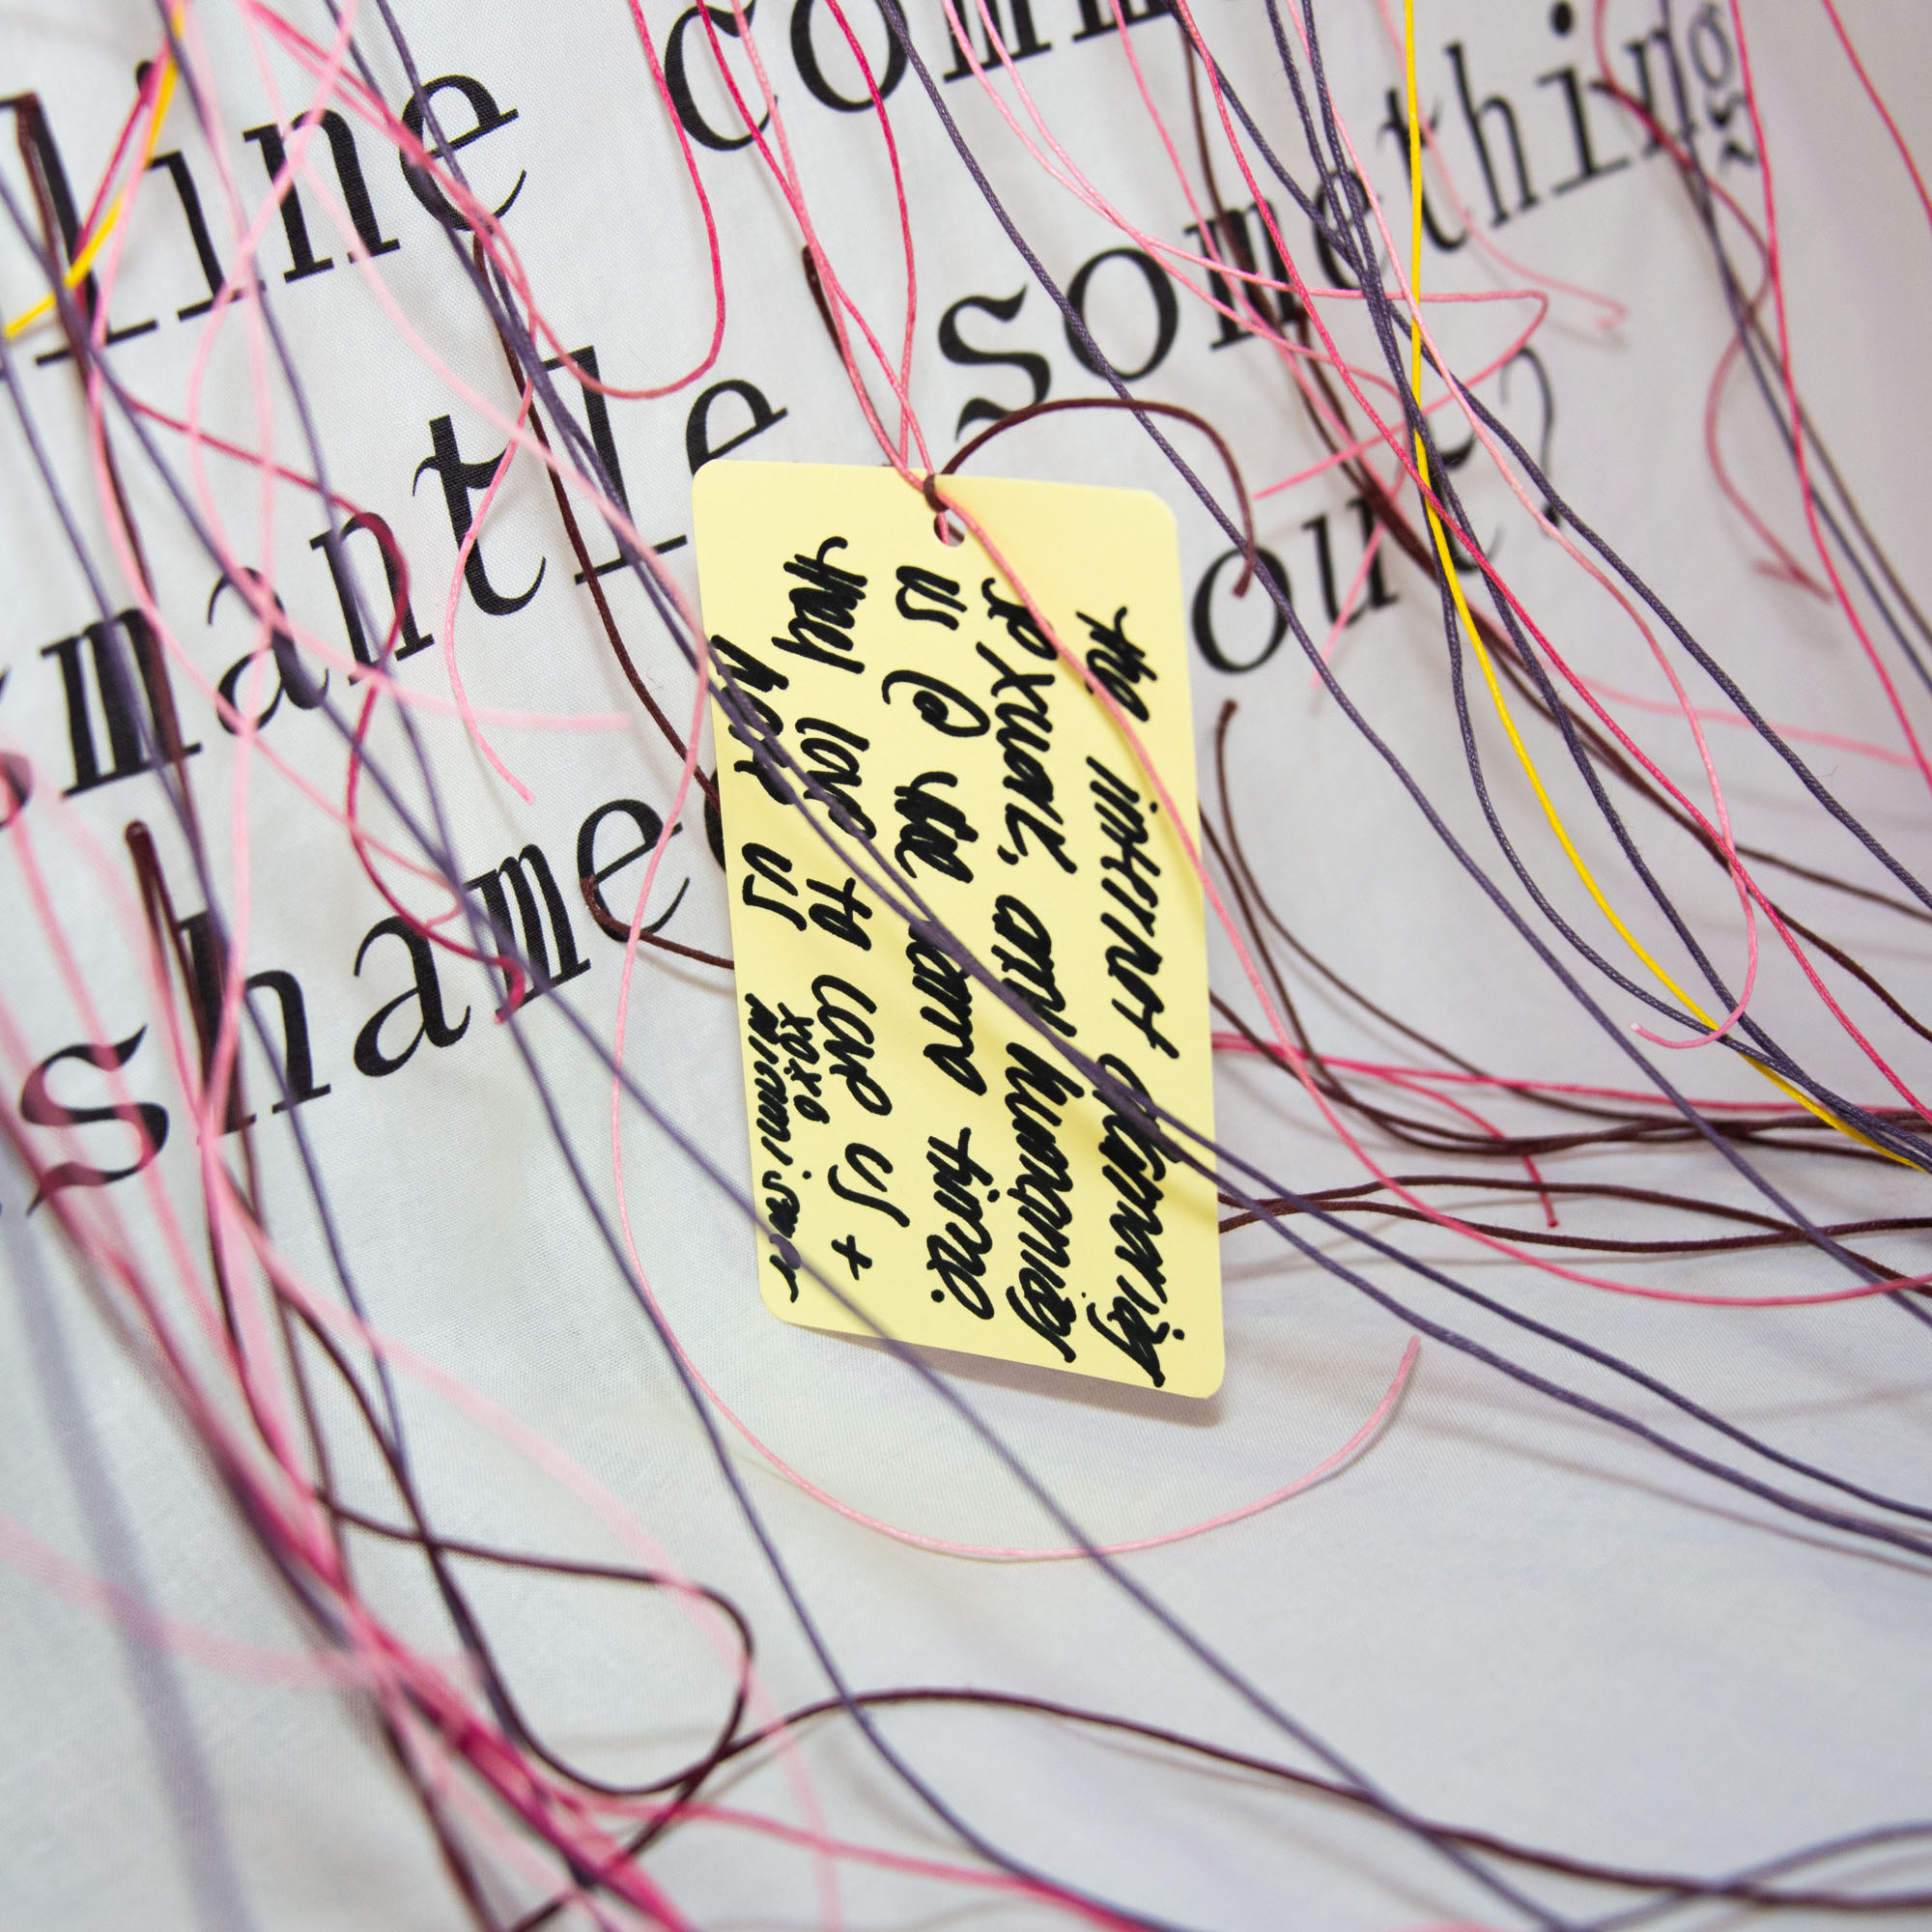 A closeup of the banner shows it's covered in draping colored strings, one with a yellow tag covered in handwriting tied to it.